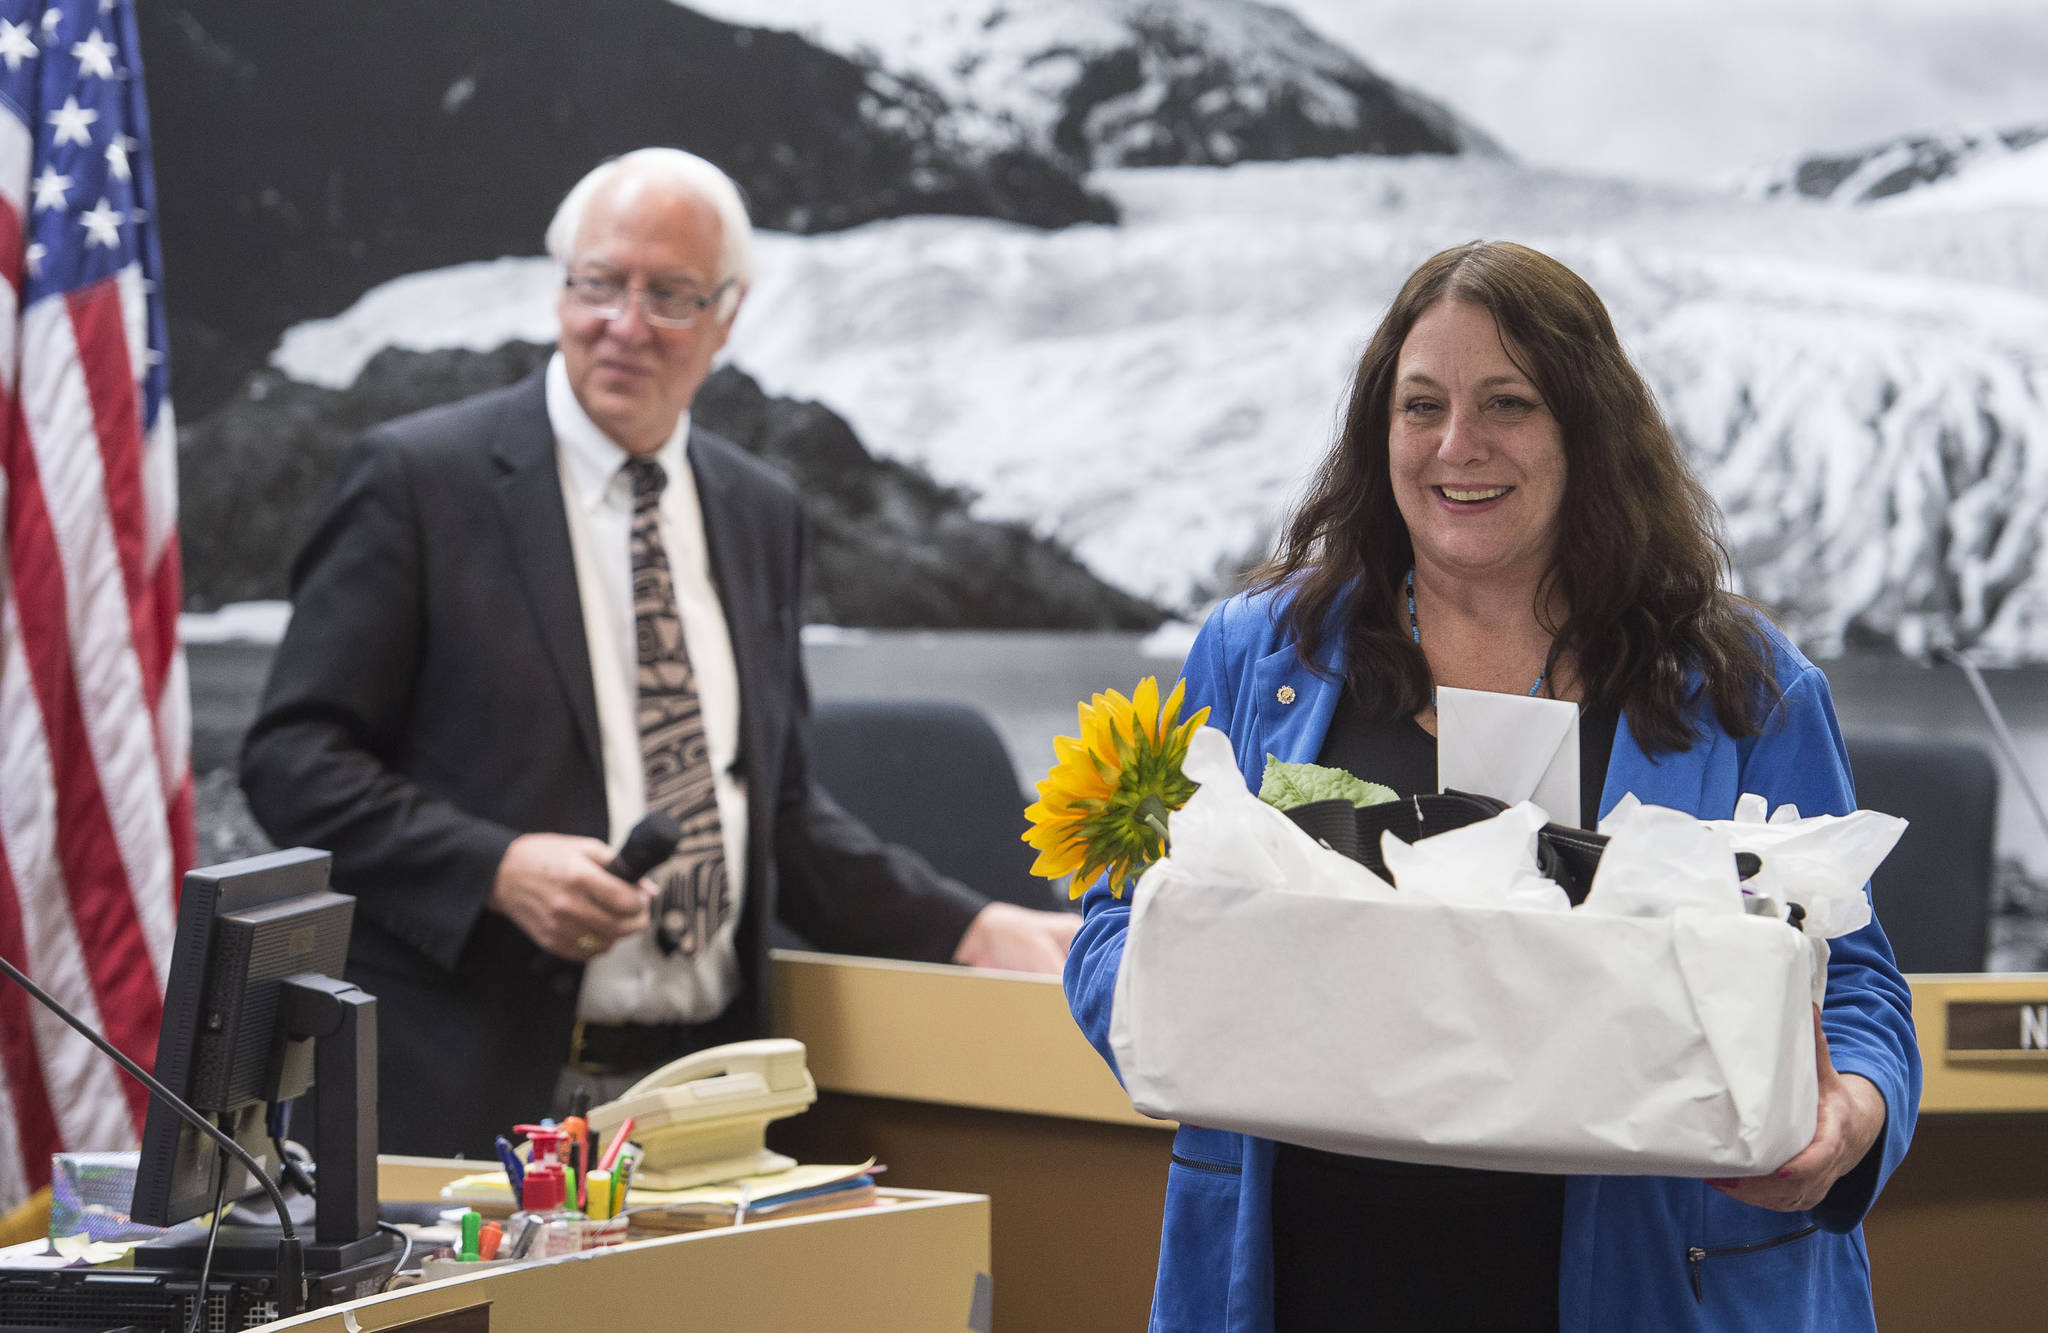 Former Assembly member Debbie White leaves the Assembly chambers after being acknowledged for her service on the Assembly and many city committees at the start of the Assembly meeting on Monday, Oct. 16, 2017. (Michael Penn | Juneau Empire File)